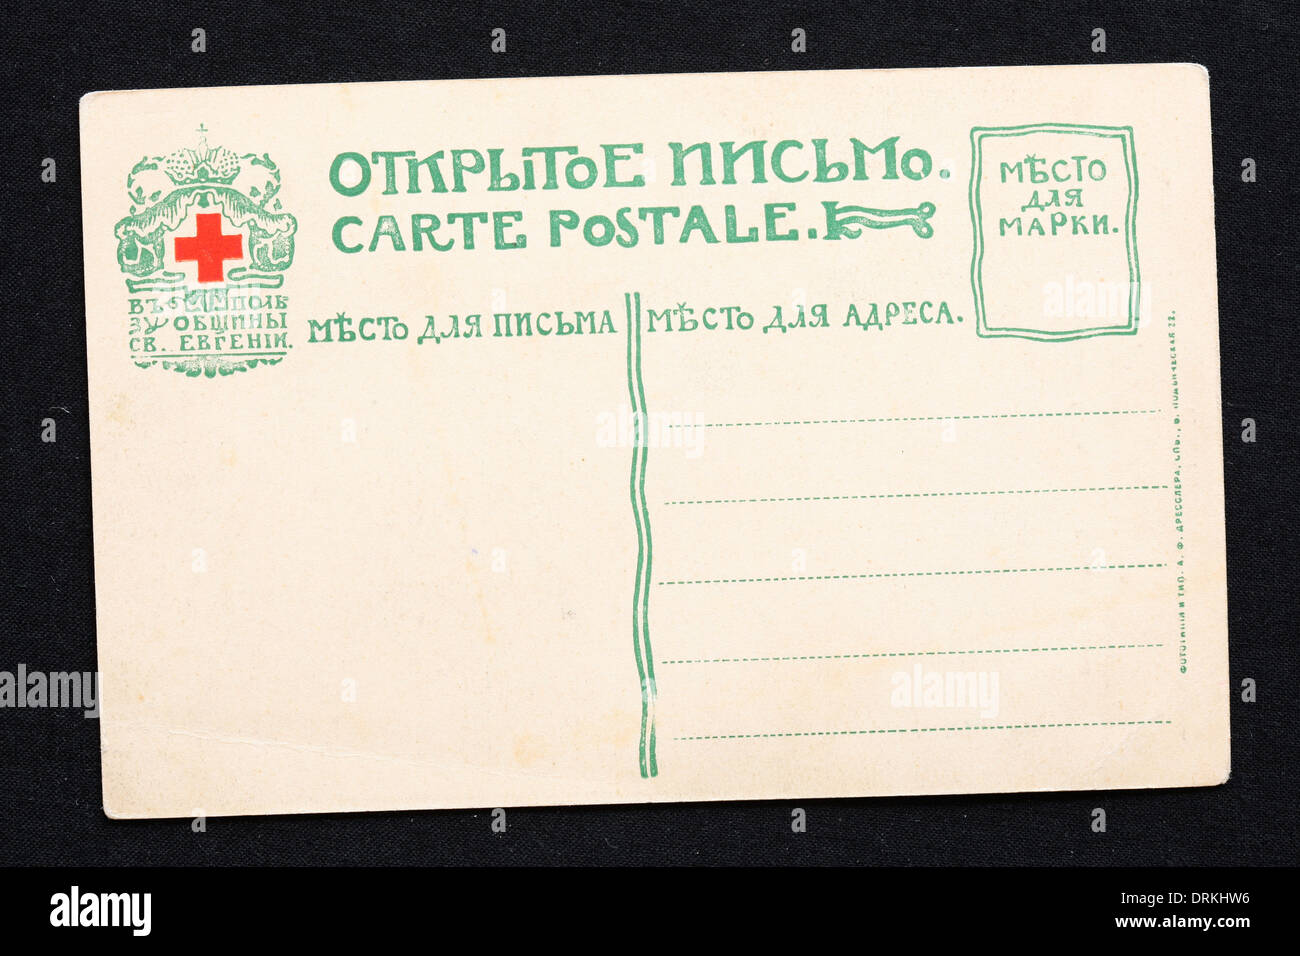 Russian postcard from the time of World War I. Stock Photo